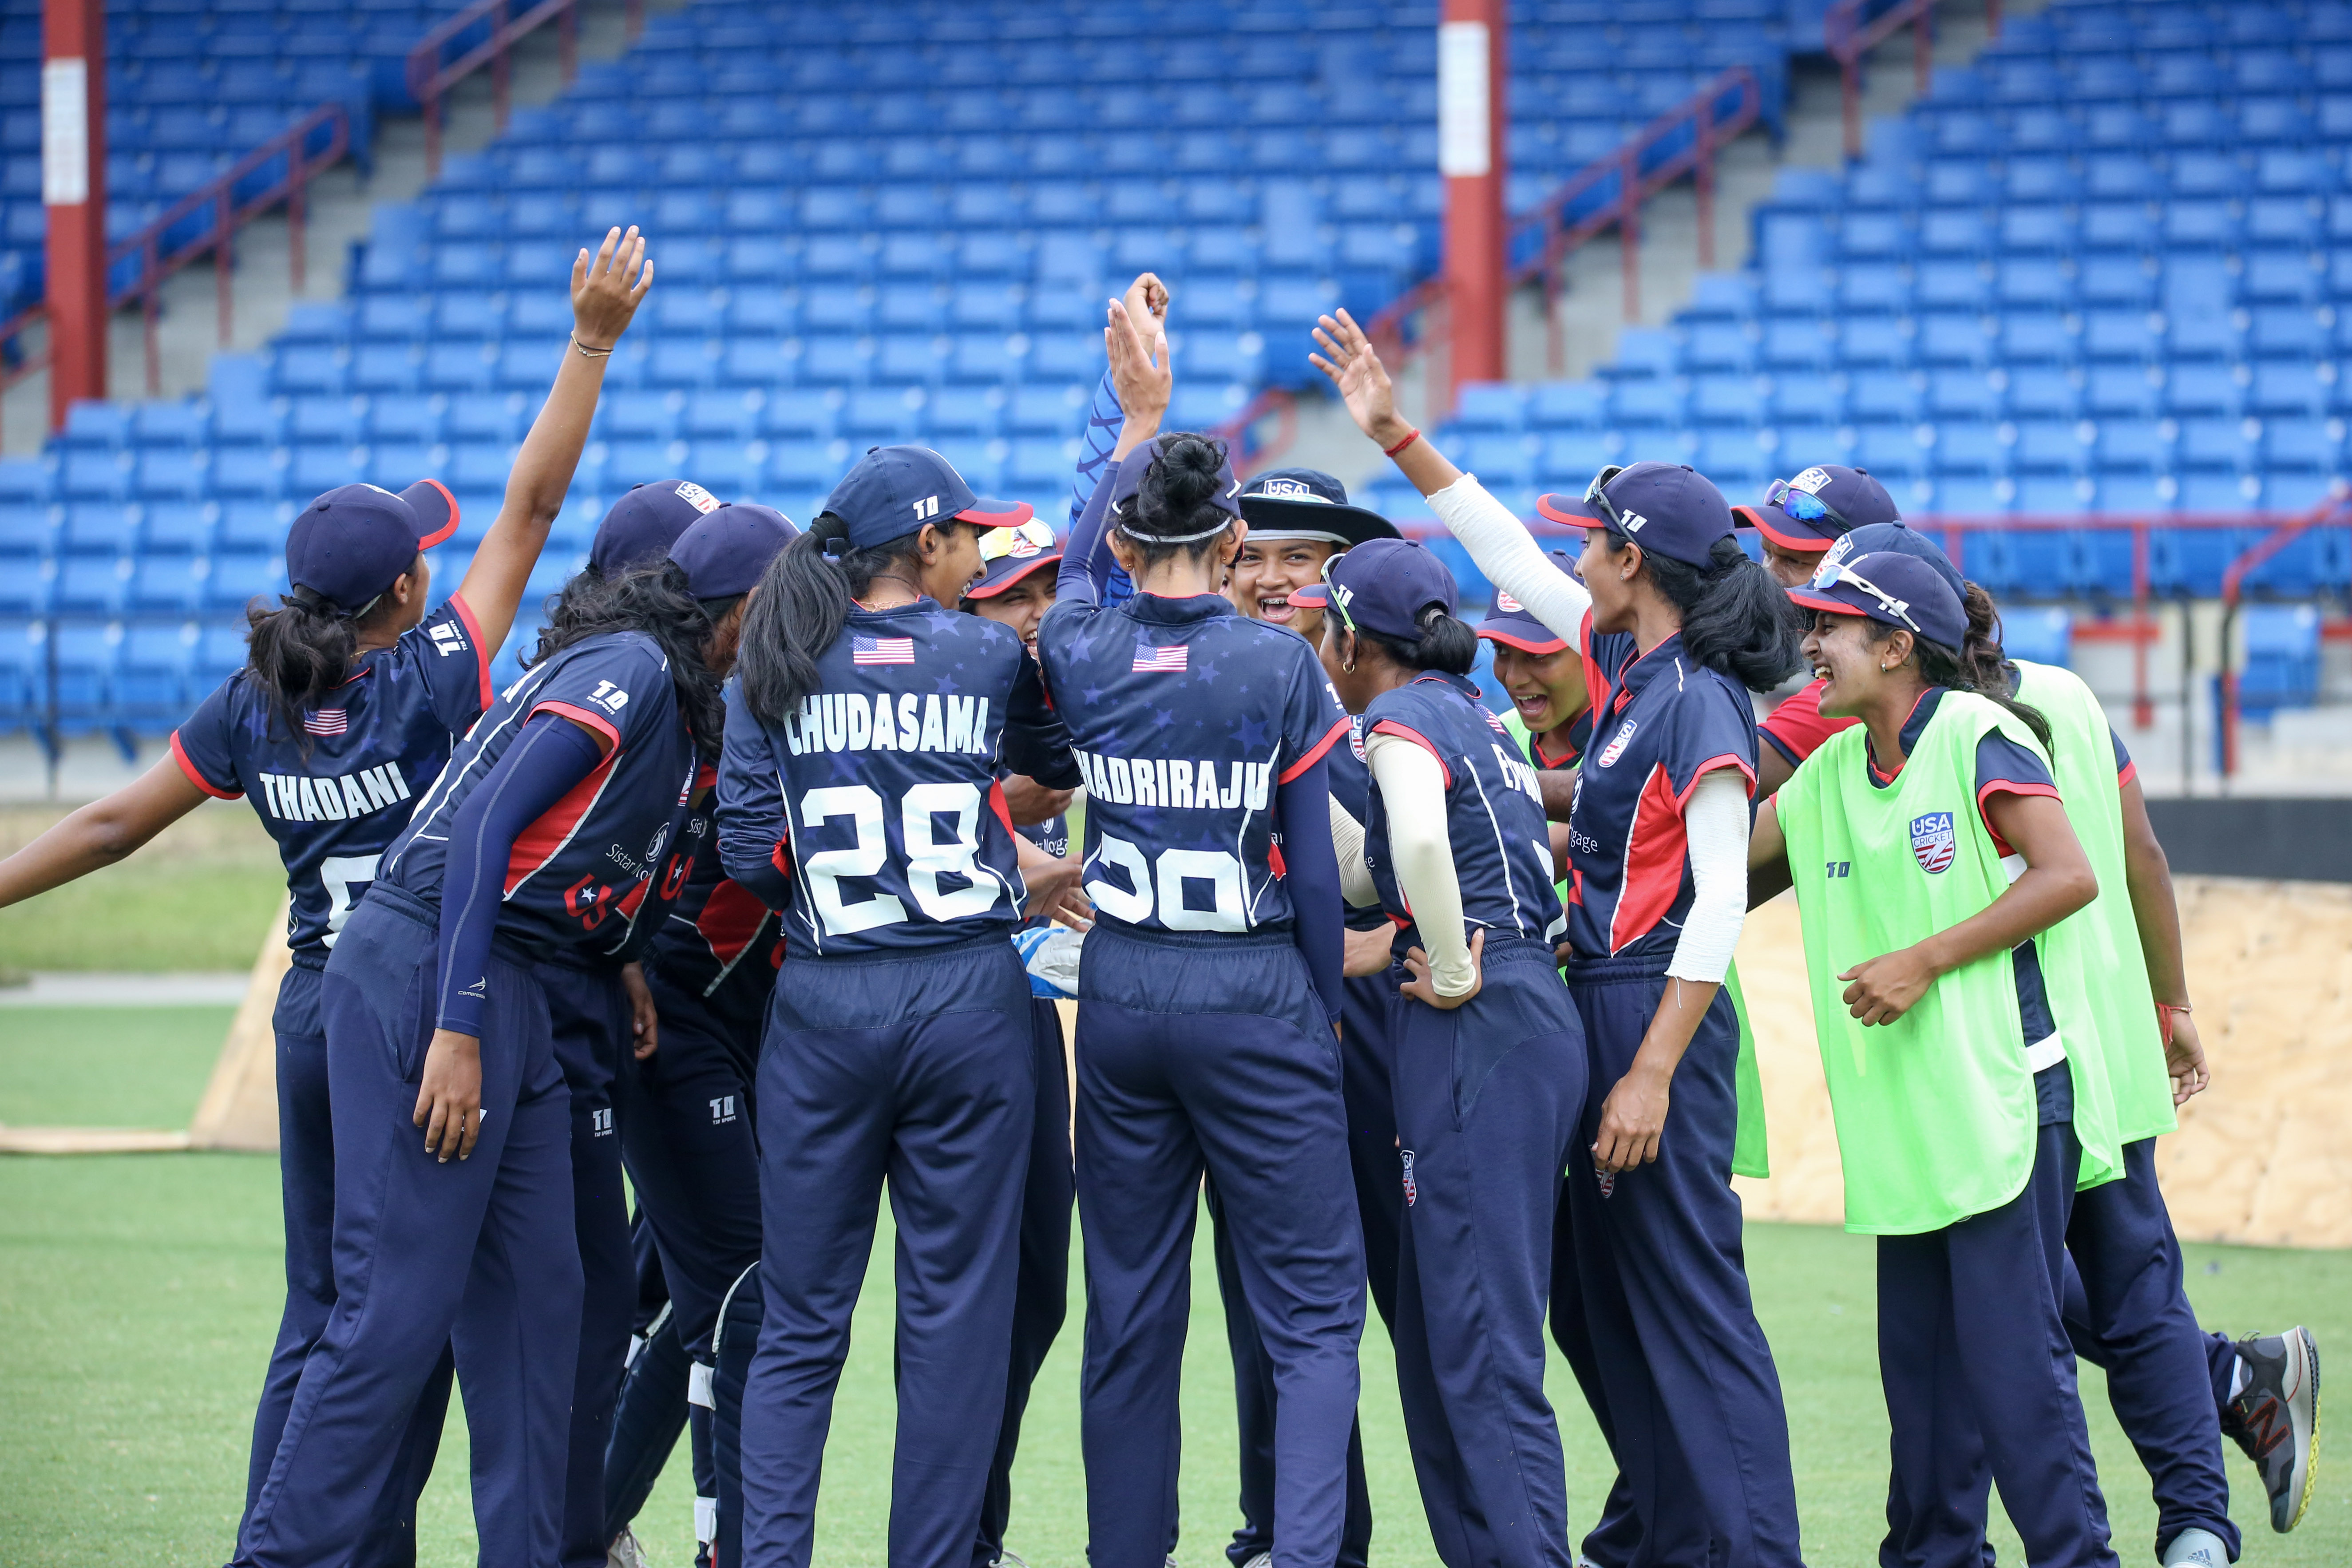 West Indies U19 Square Series after Historic USA Win in First Game in Florida